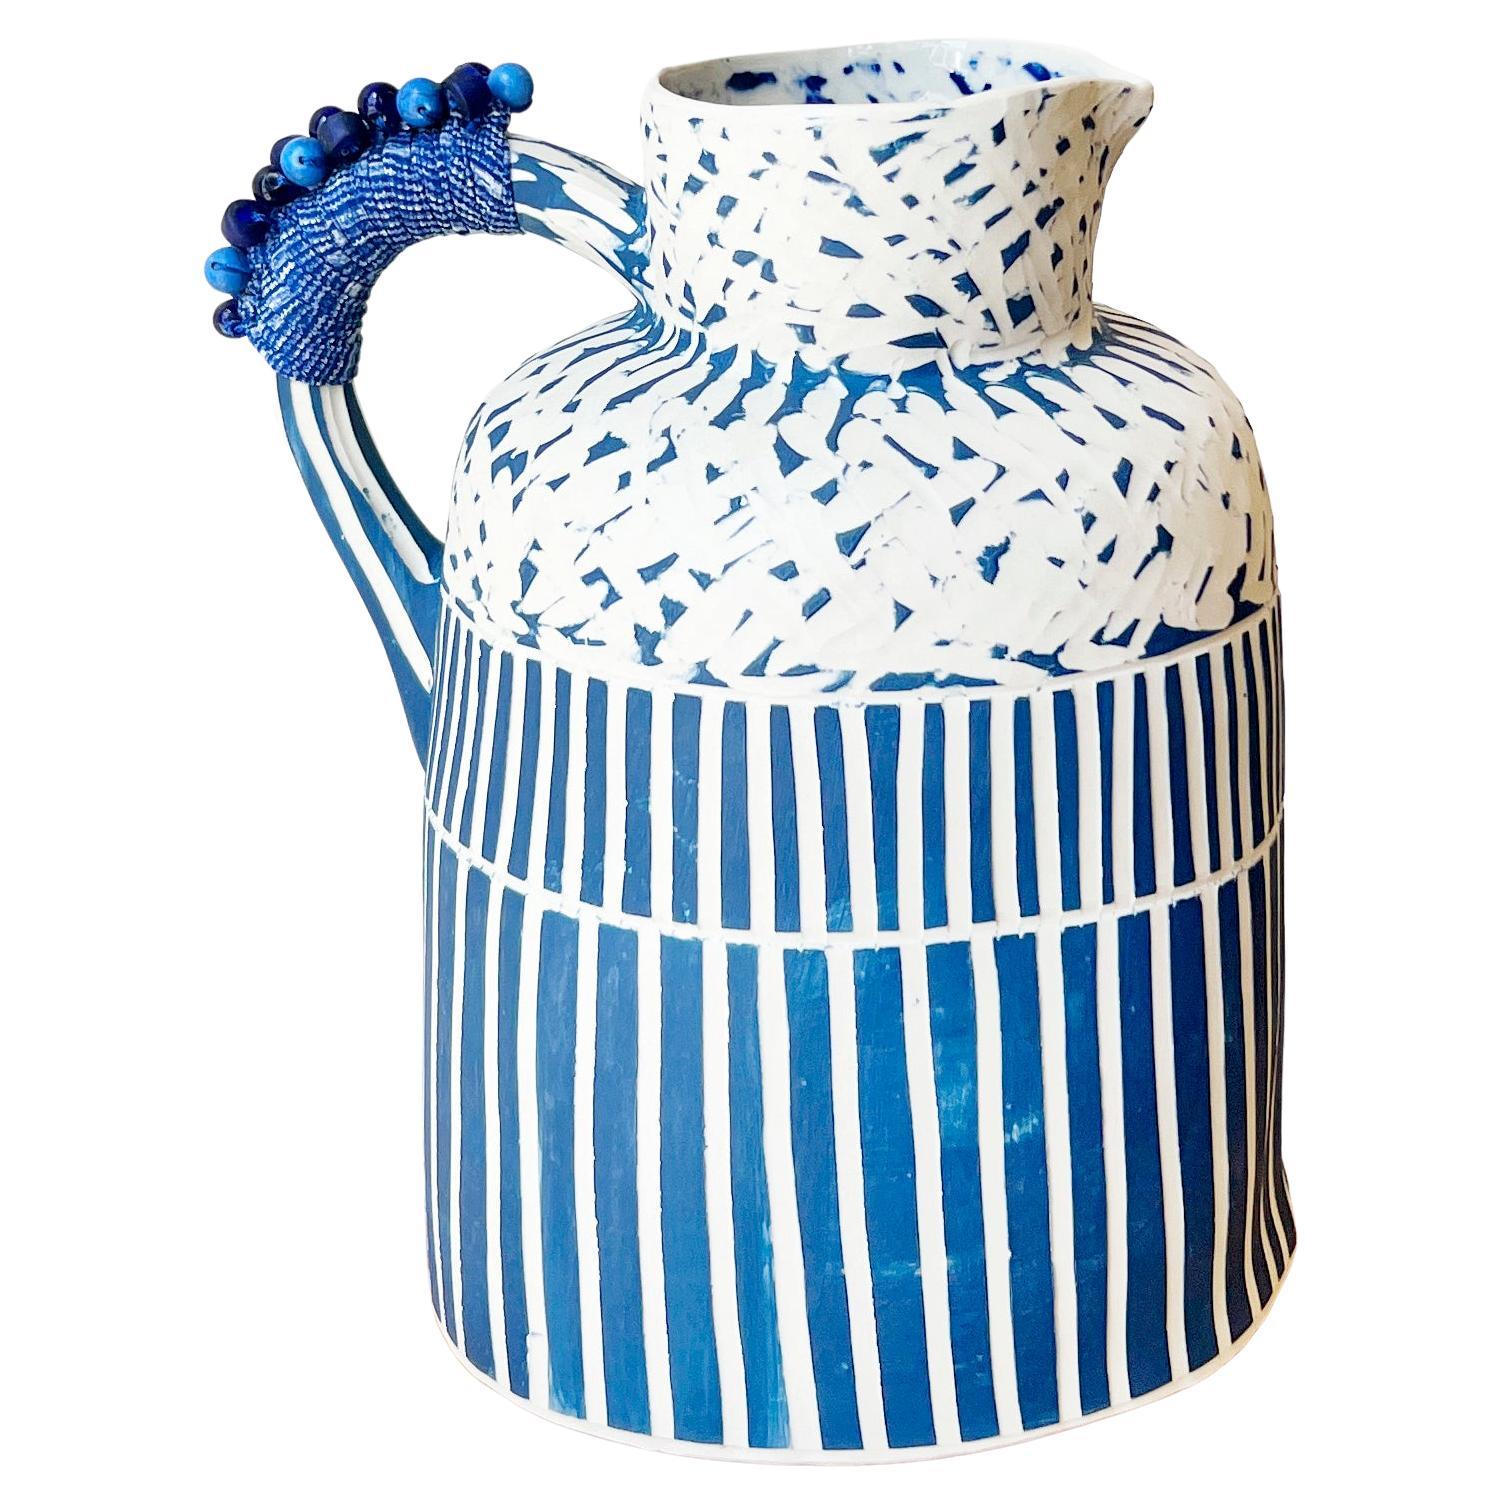 Tiled Handmade Whimsical Ceramic Jug in White and Blue Stripes w/ Beads For Sale